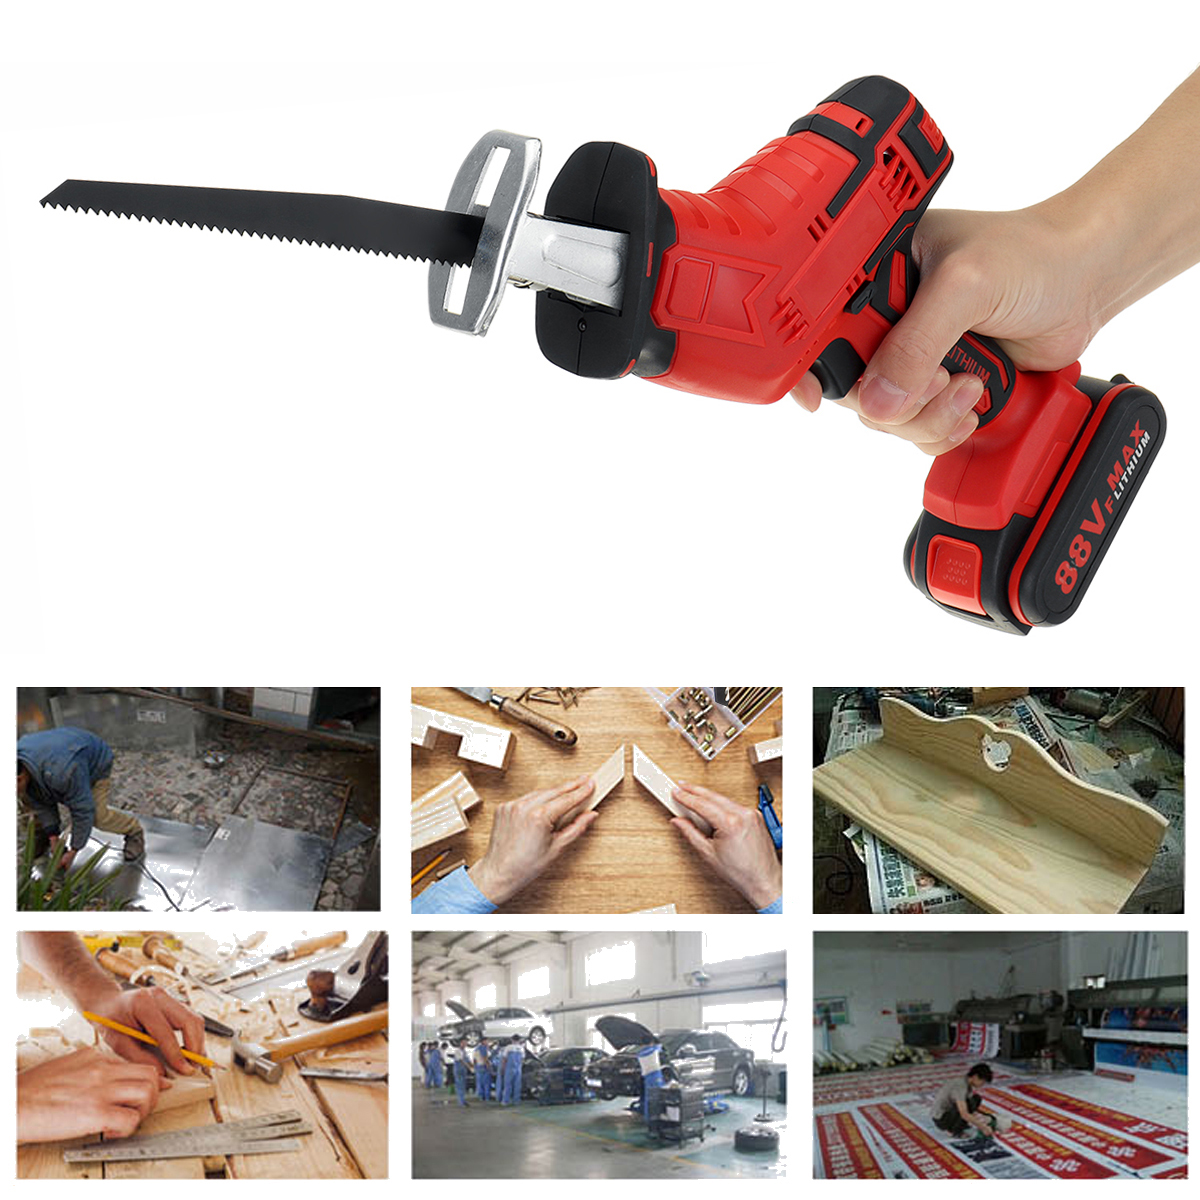 88VF-Electric-Reciprocating-Saws-Outdoor-Woodworking-Cordless-Portable-Wood-Cutting-Saw-1718639-3